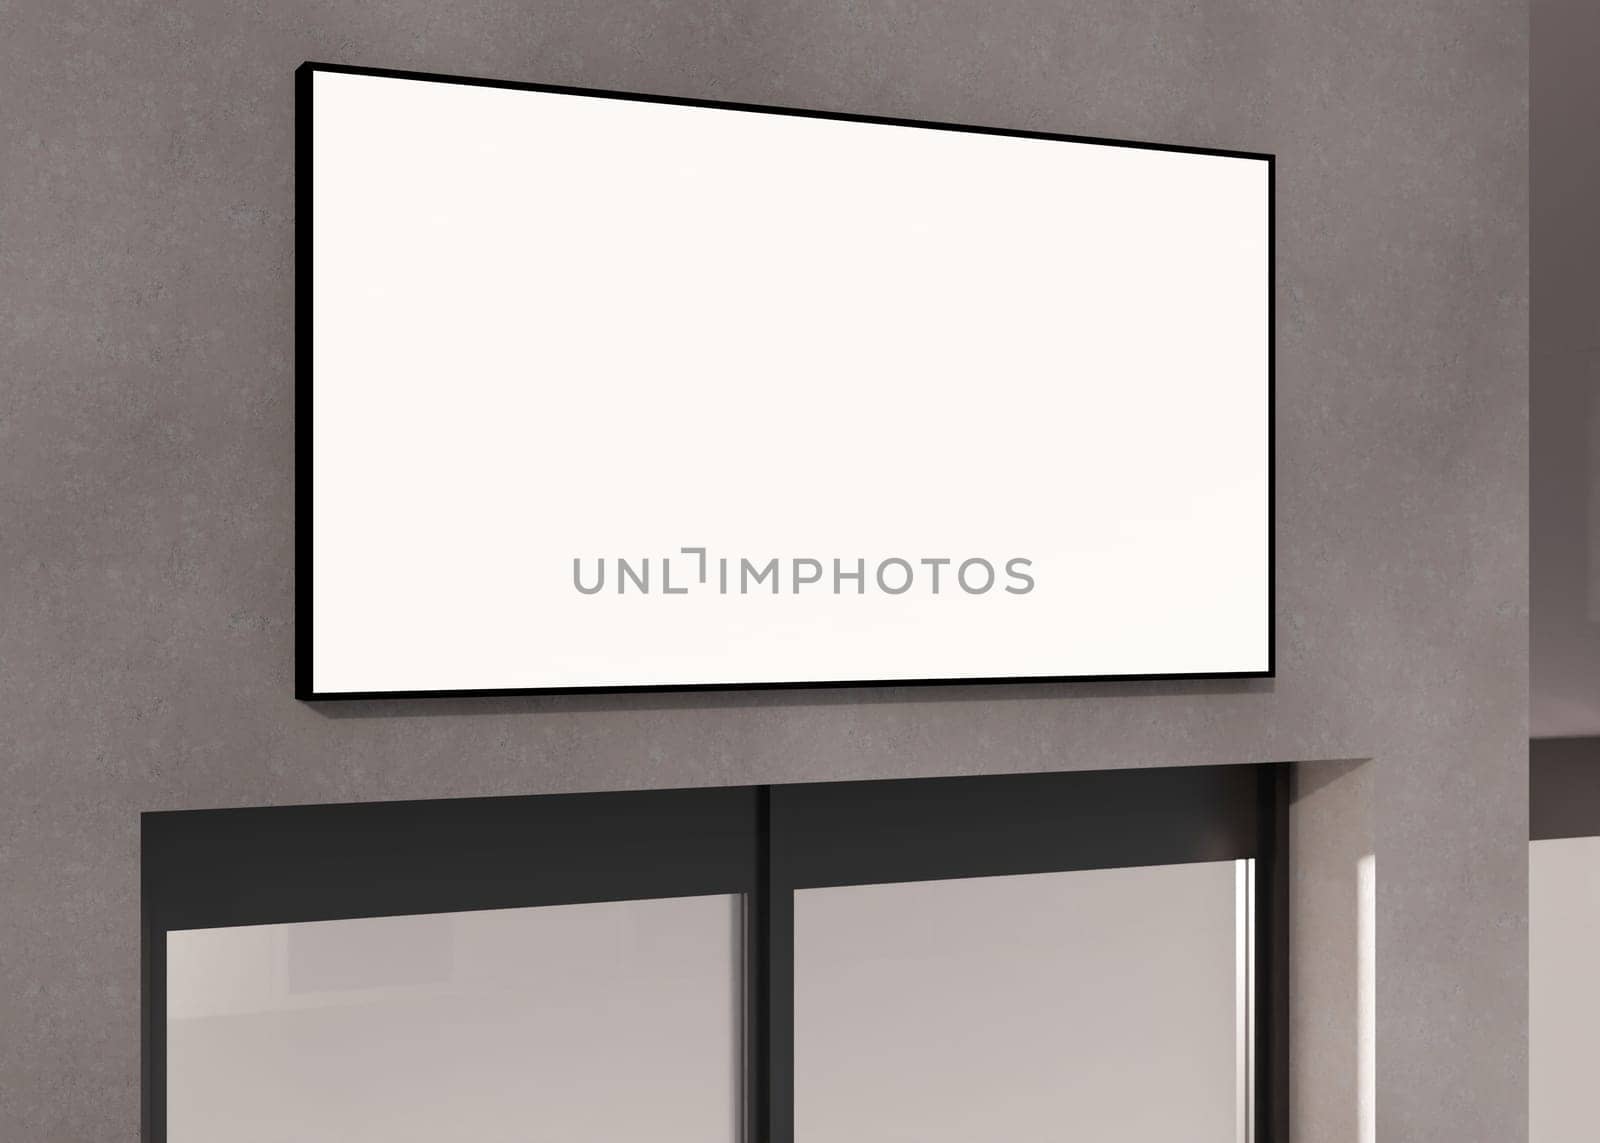 A modern rectangular blank signboard on a textured grey wall above a entry, ideal for businesses to showcase logos or advertising. Shop, office, company signboard. Illuminated lightbox. 3D